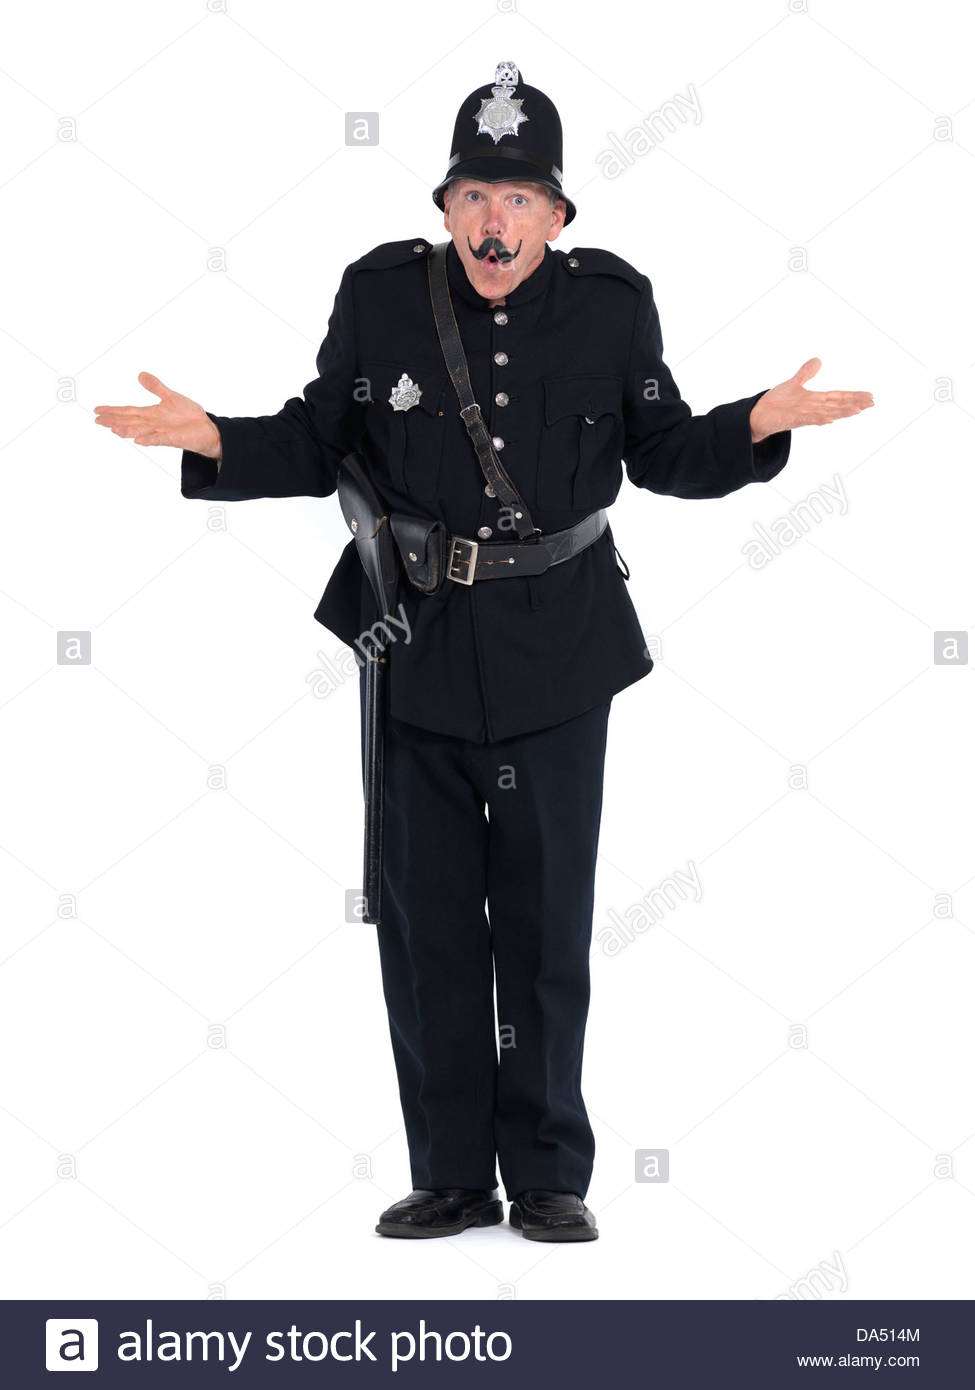 Humorous Vintage Police Officer Keystone Cop With Funny